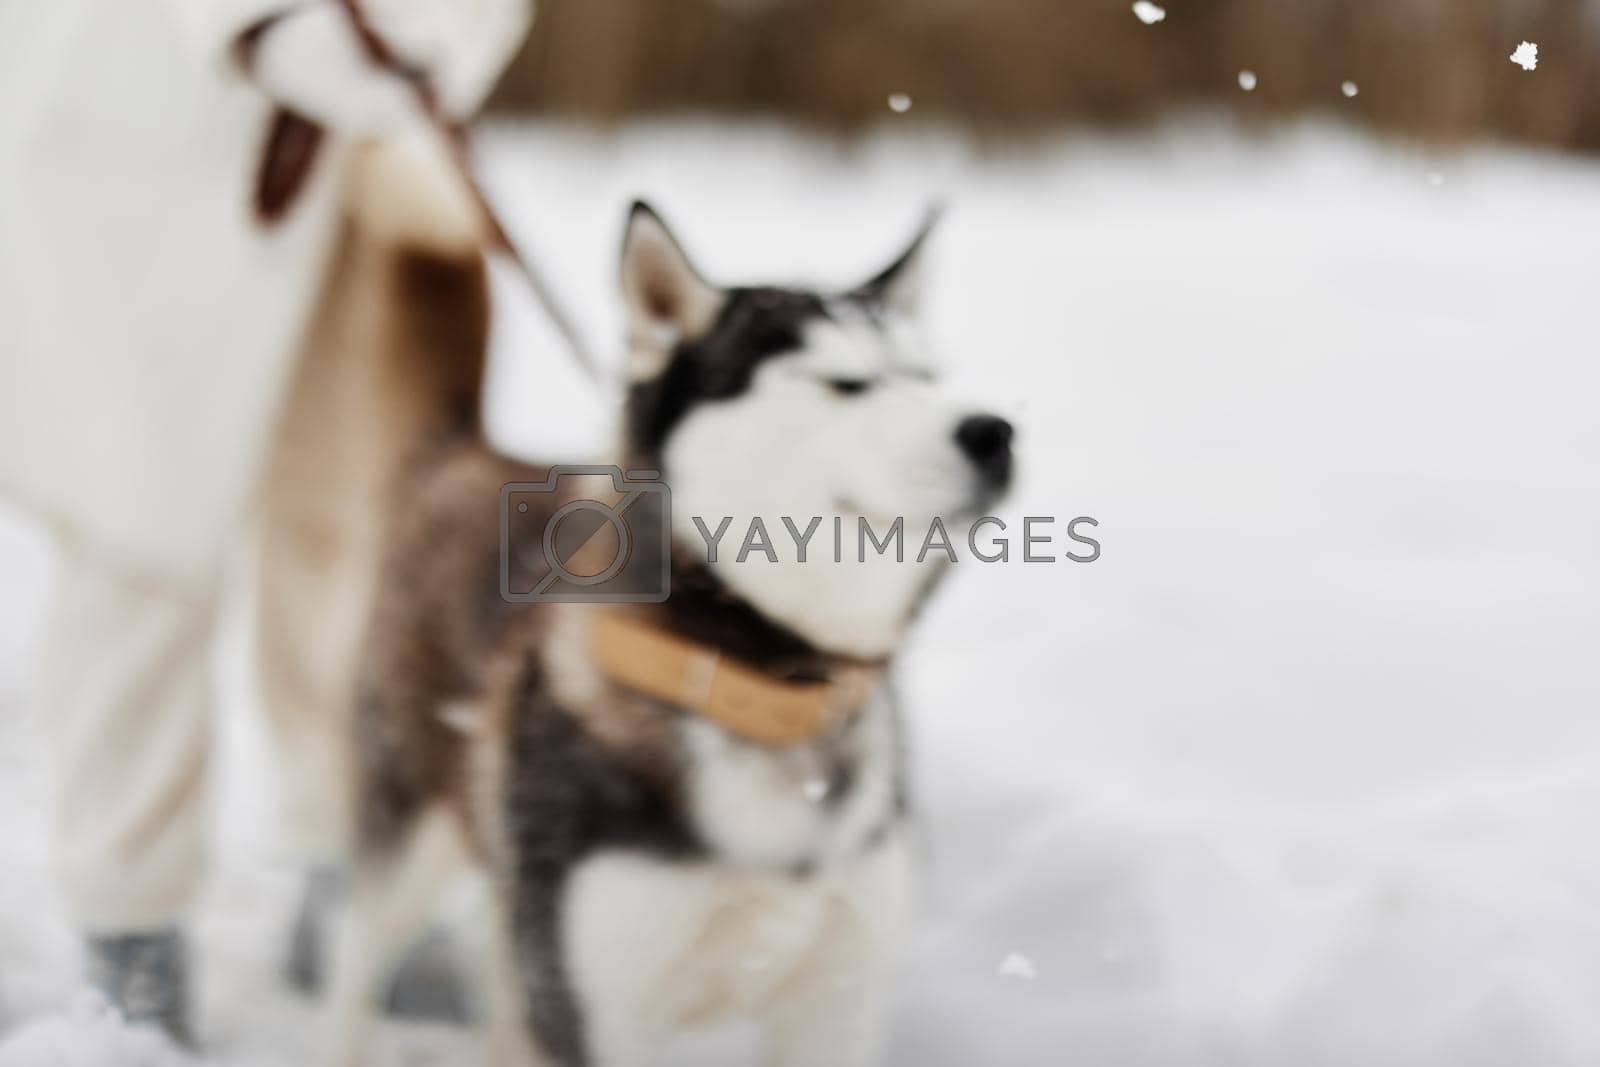 young woman with husky winter landscape walk friendship Lifestyle. High quality photo